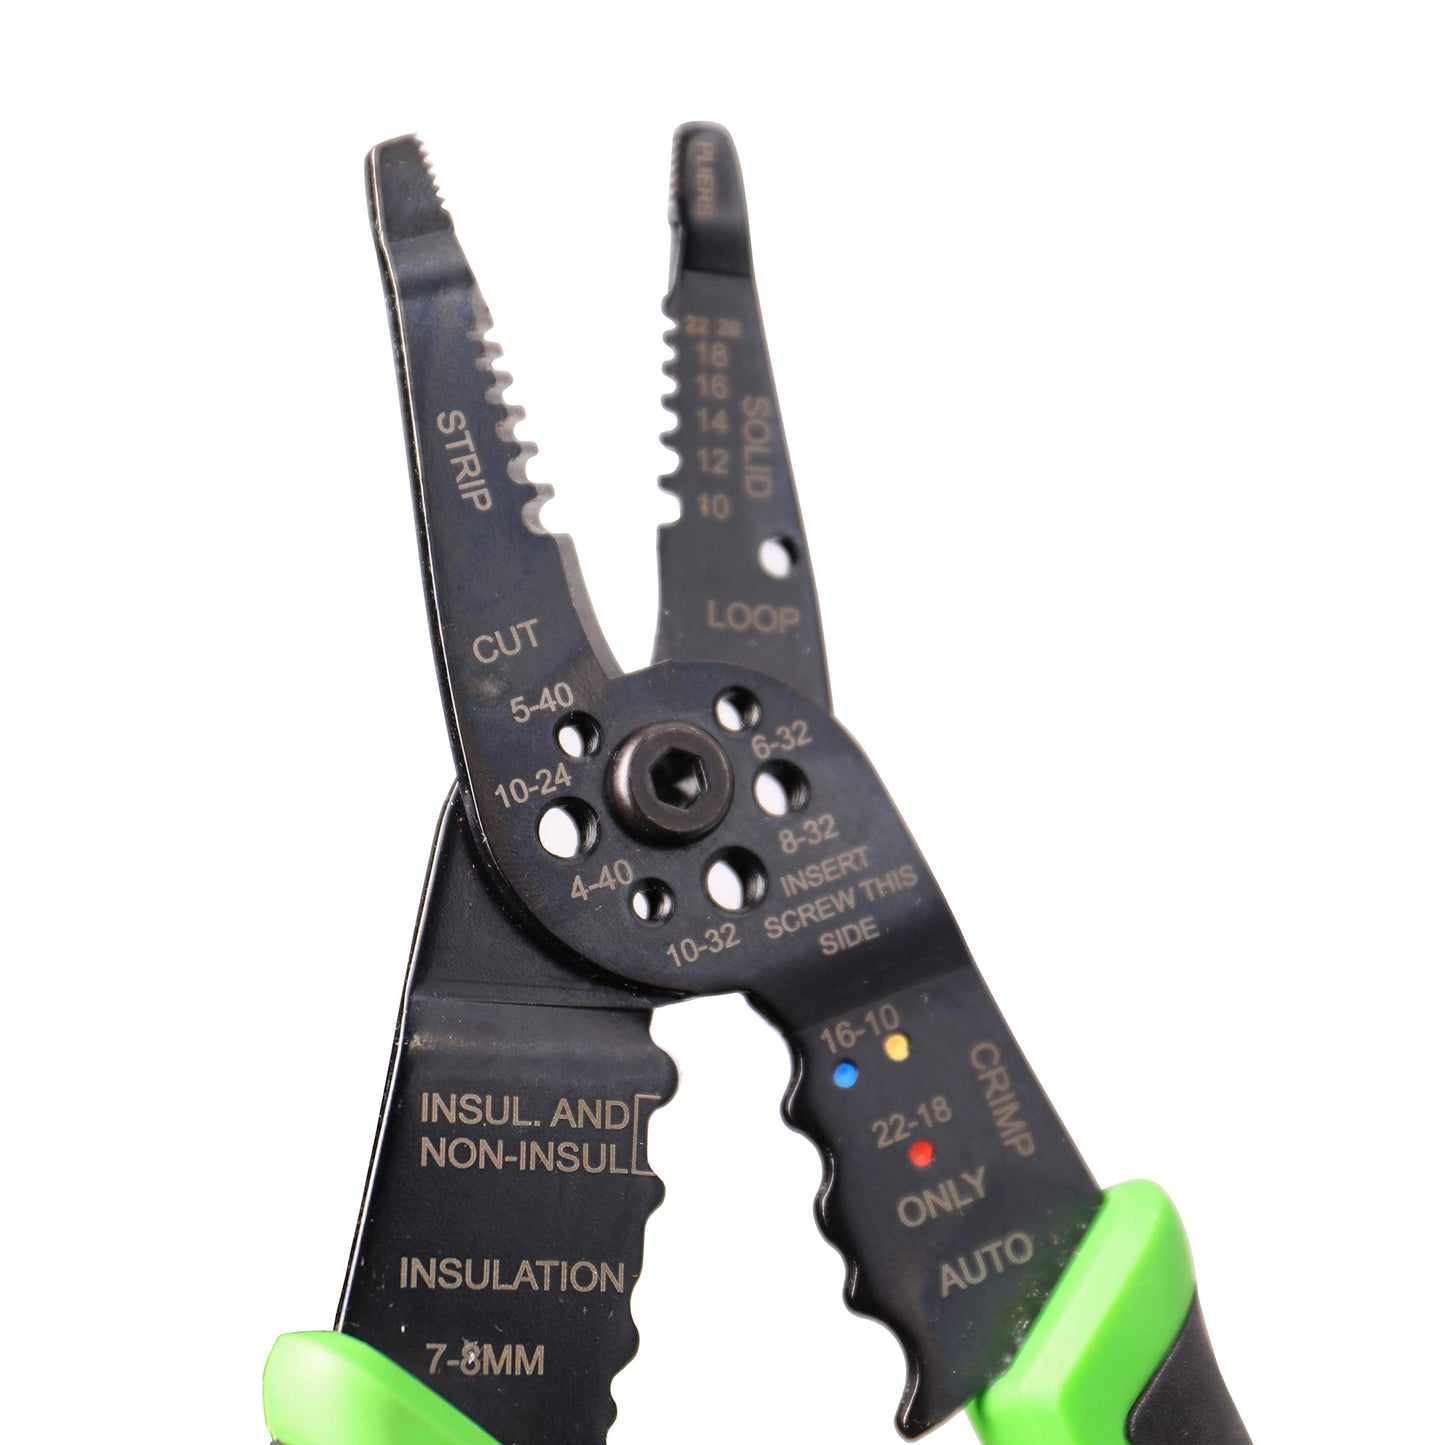 Hilmor 8" Wire Stripper with Rubber Handle Grip, Black & Green, WS8 1885424